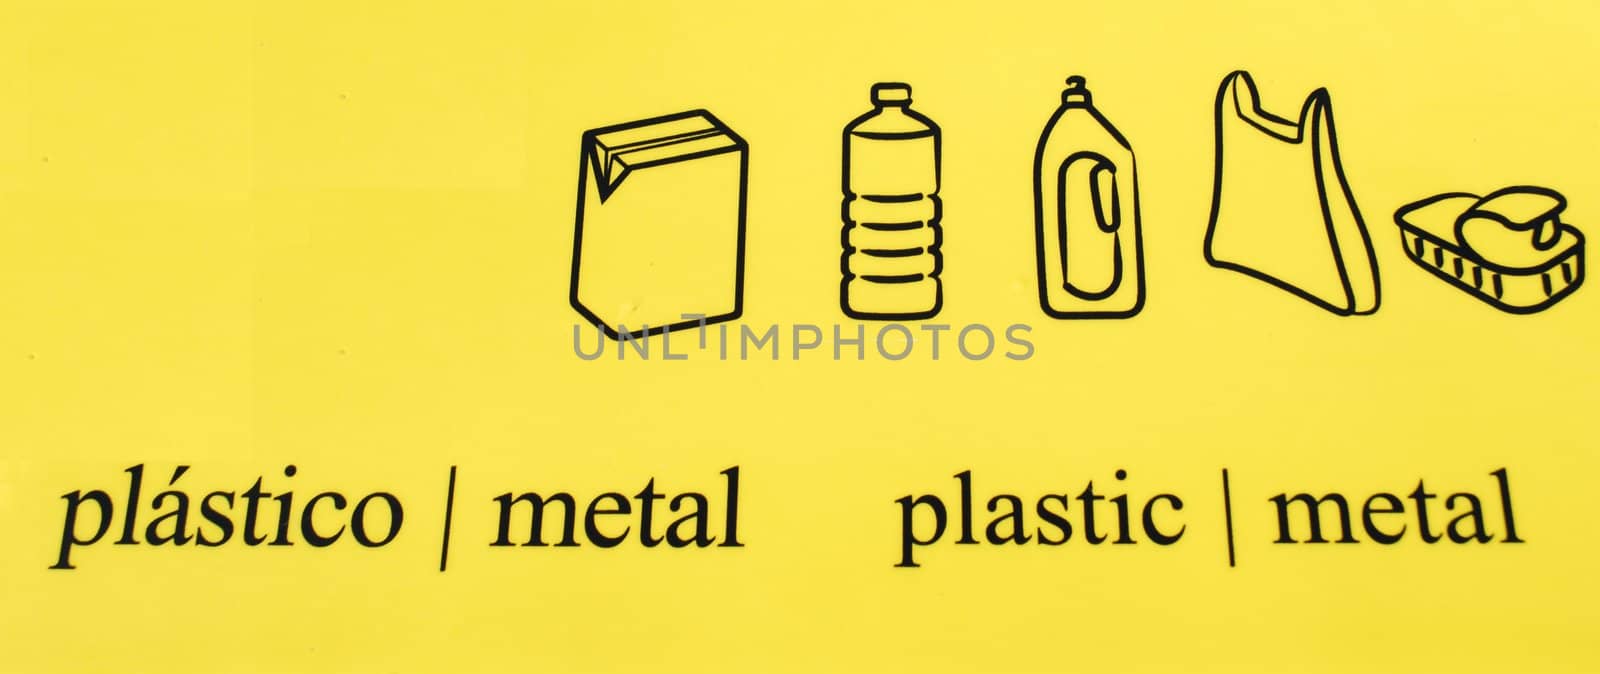 plastic and metal recycle symbols/pictures